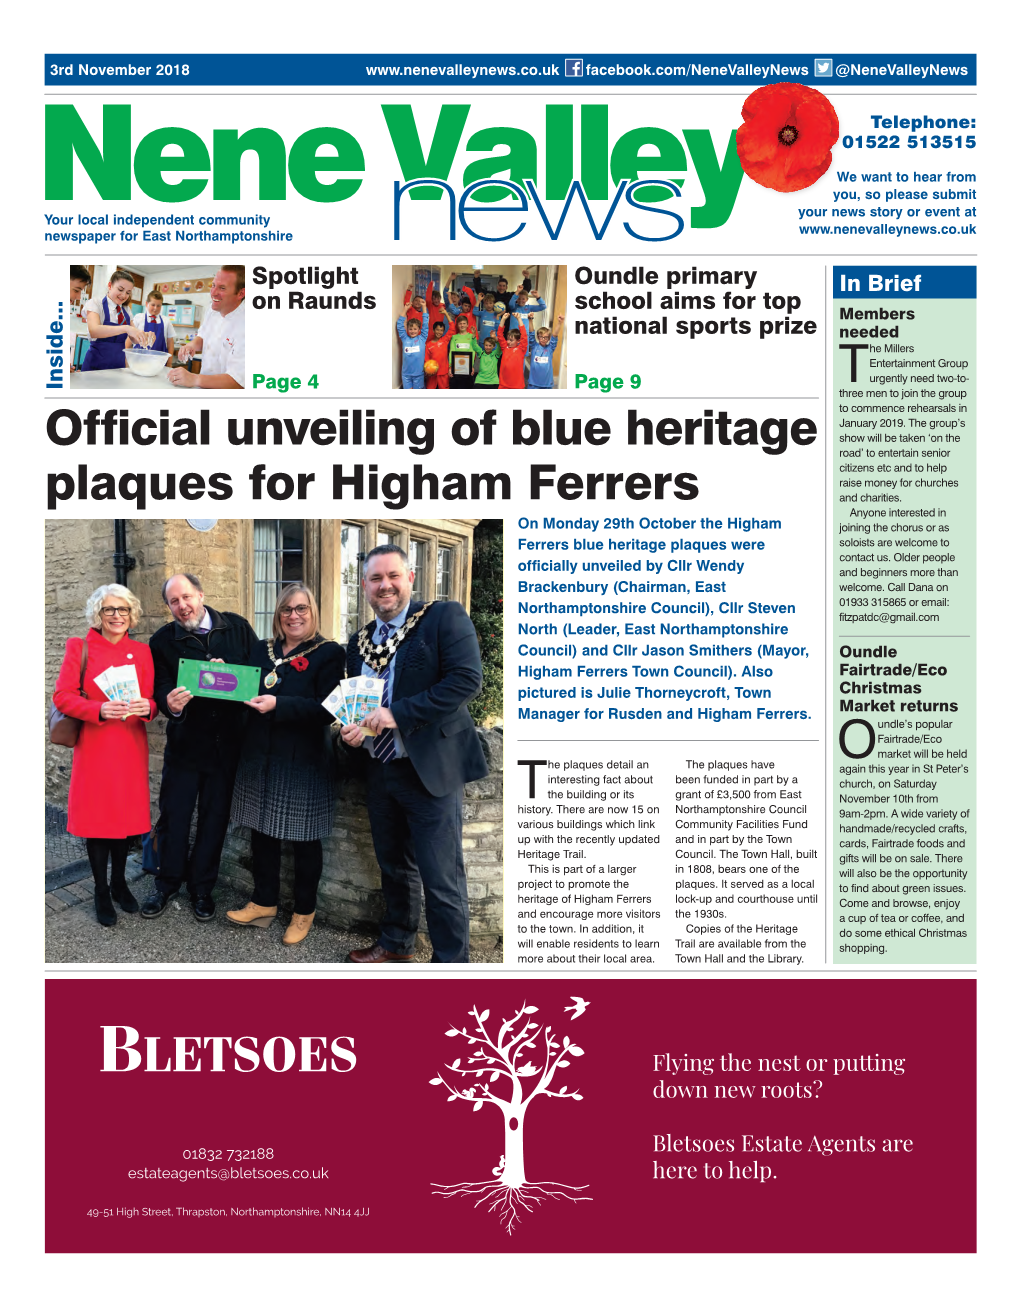 Official Unveiling of Blue Heritage Plaques for Higham Ferrers